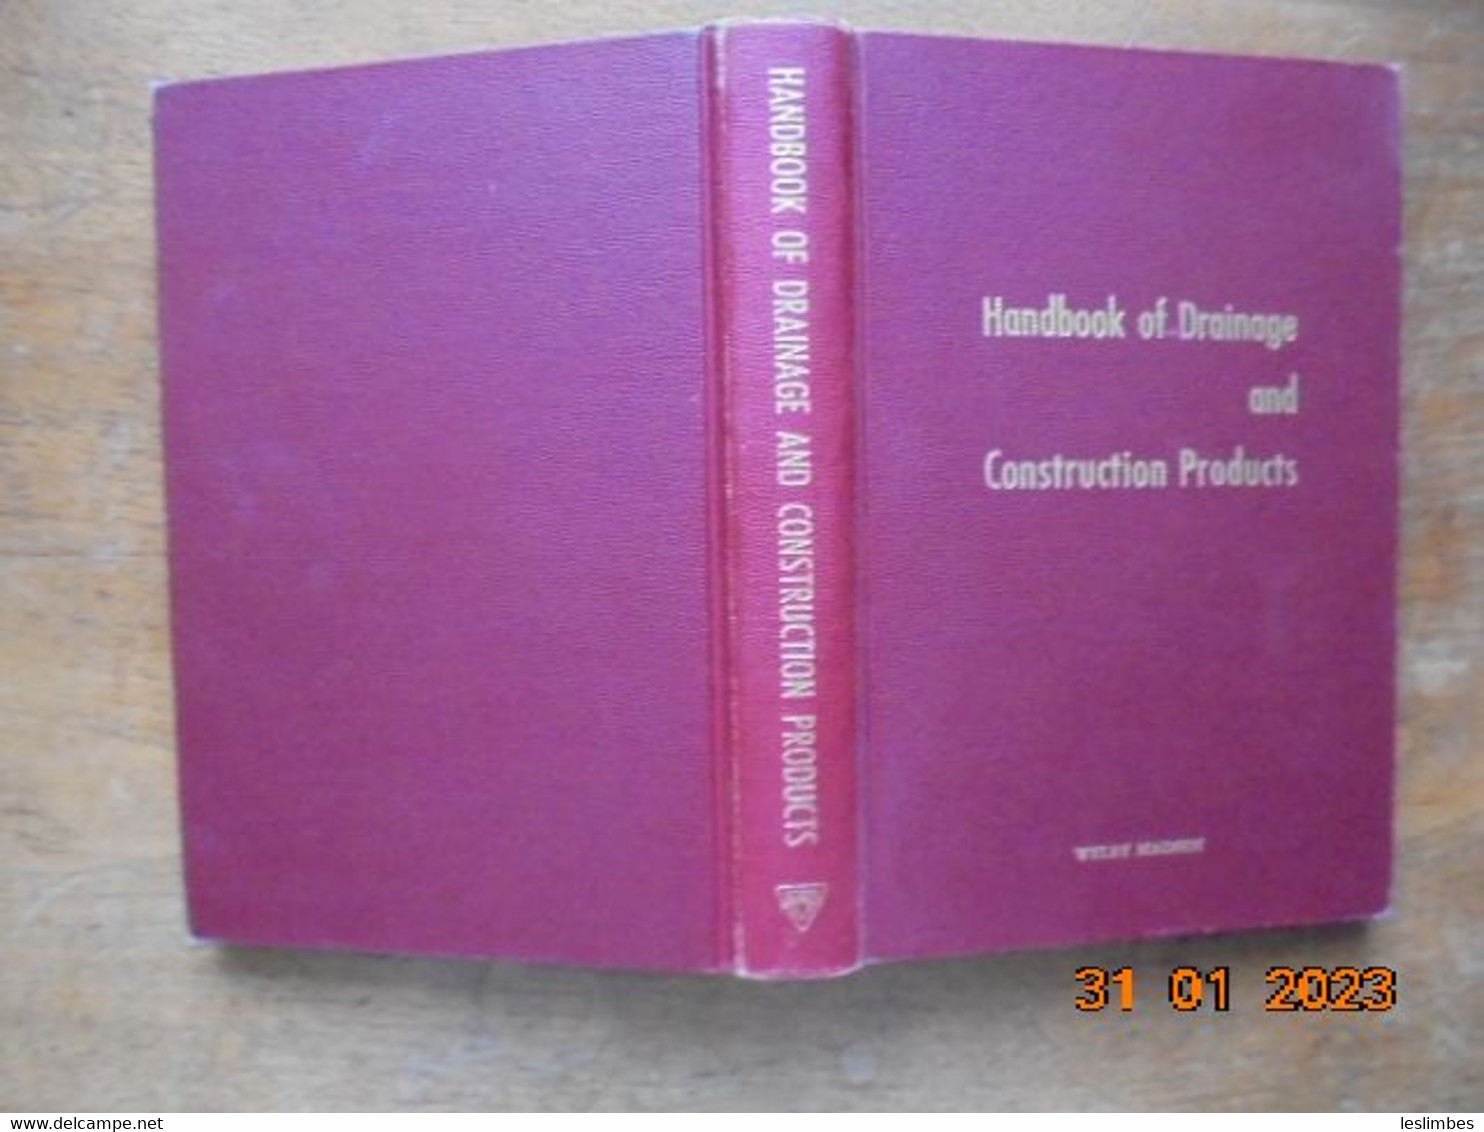 Handbook Of Drainage And Construction Products - Armco Drainage & Metal Products 1955 - Bouwkunde